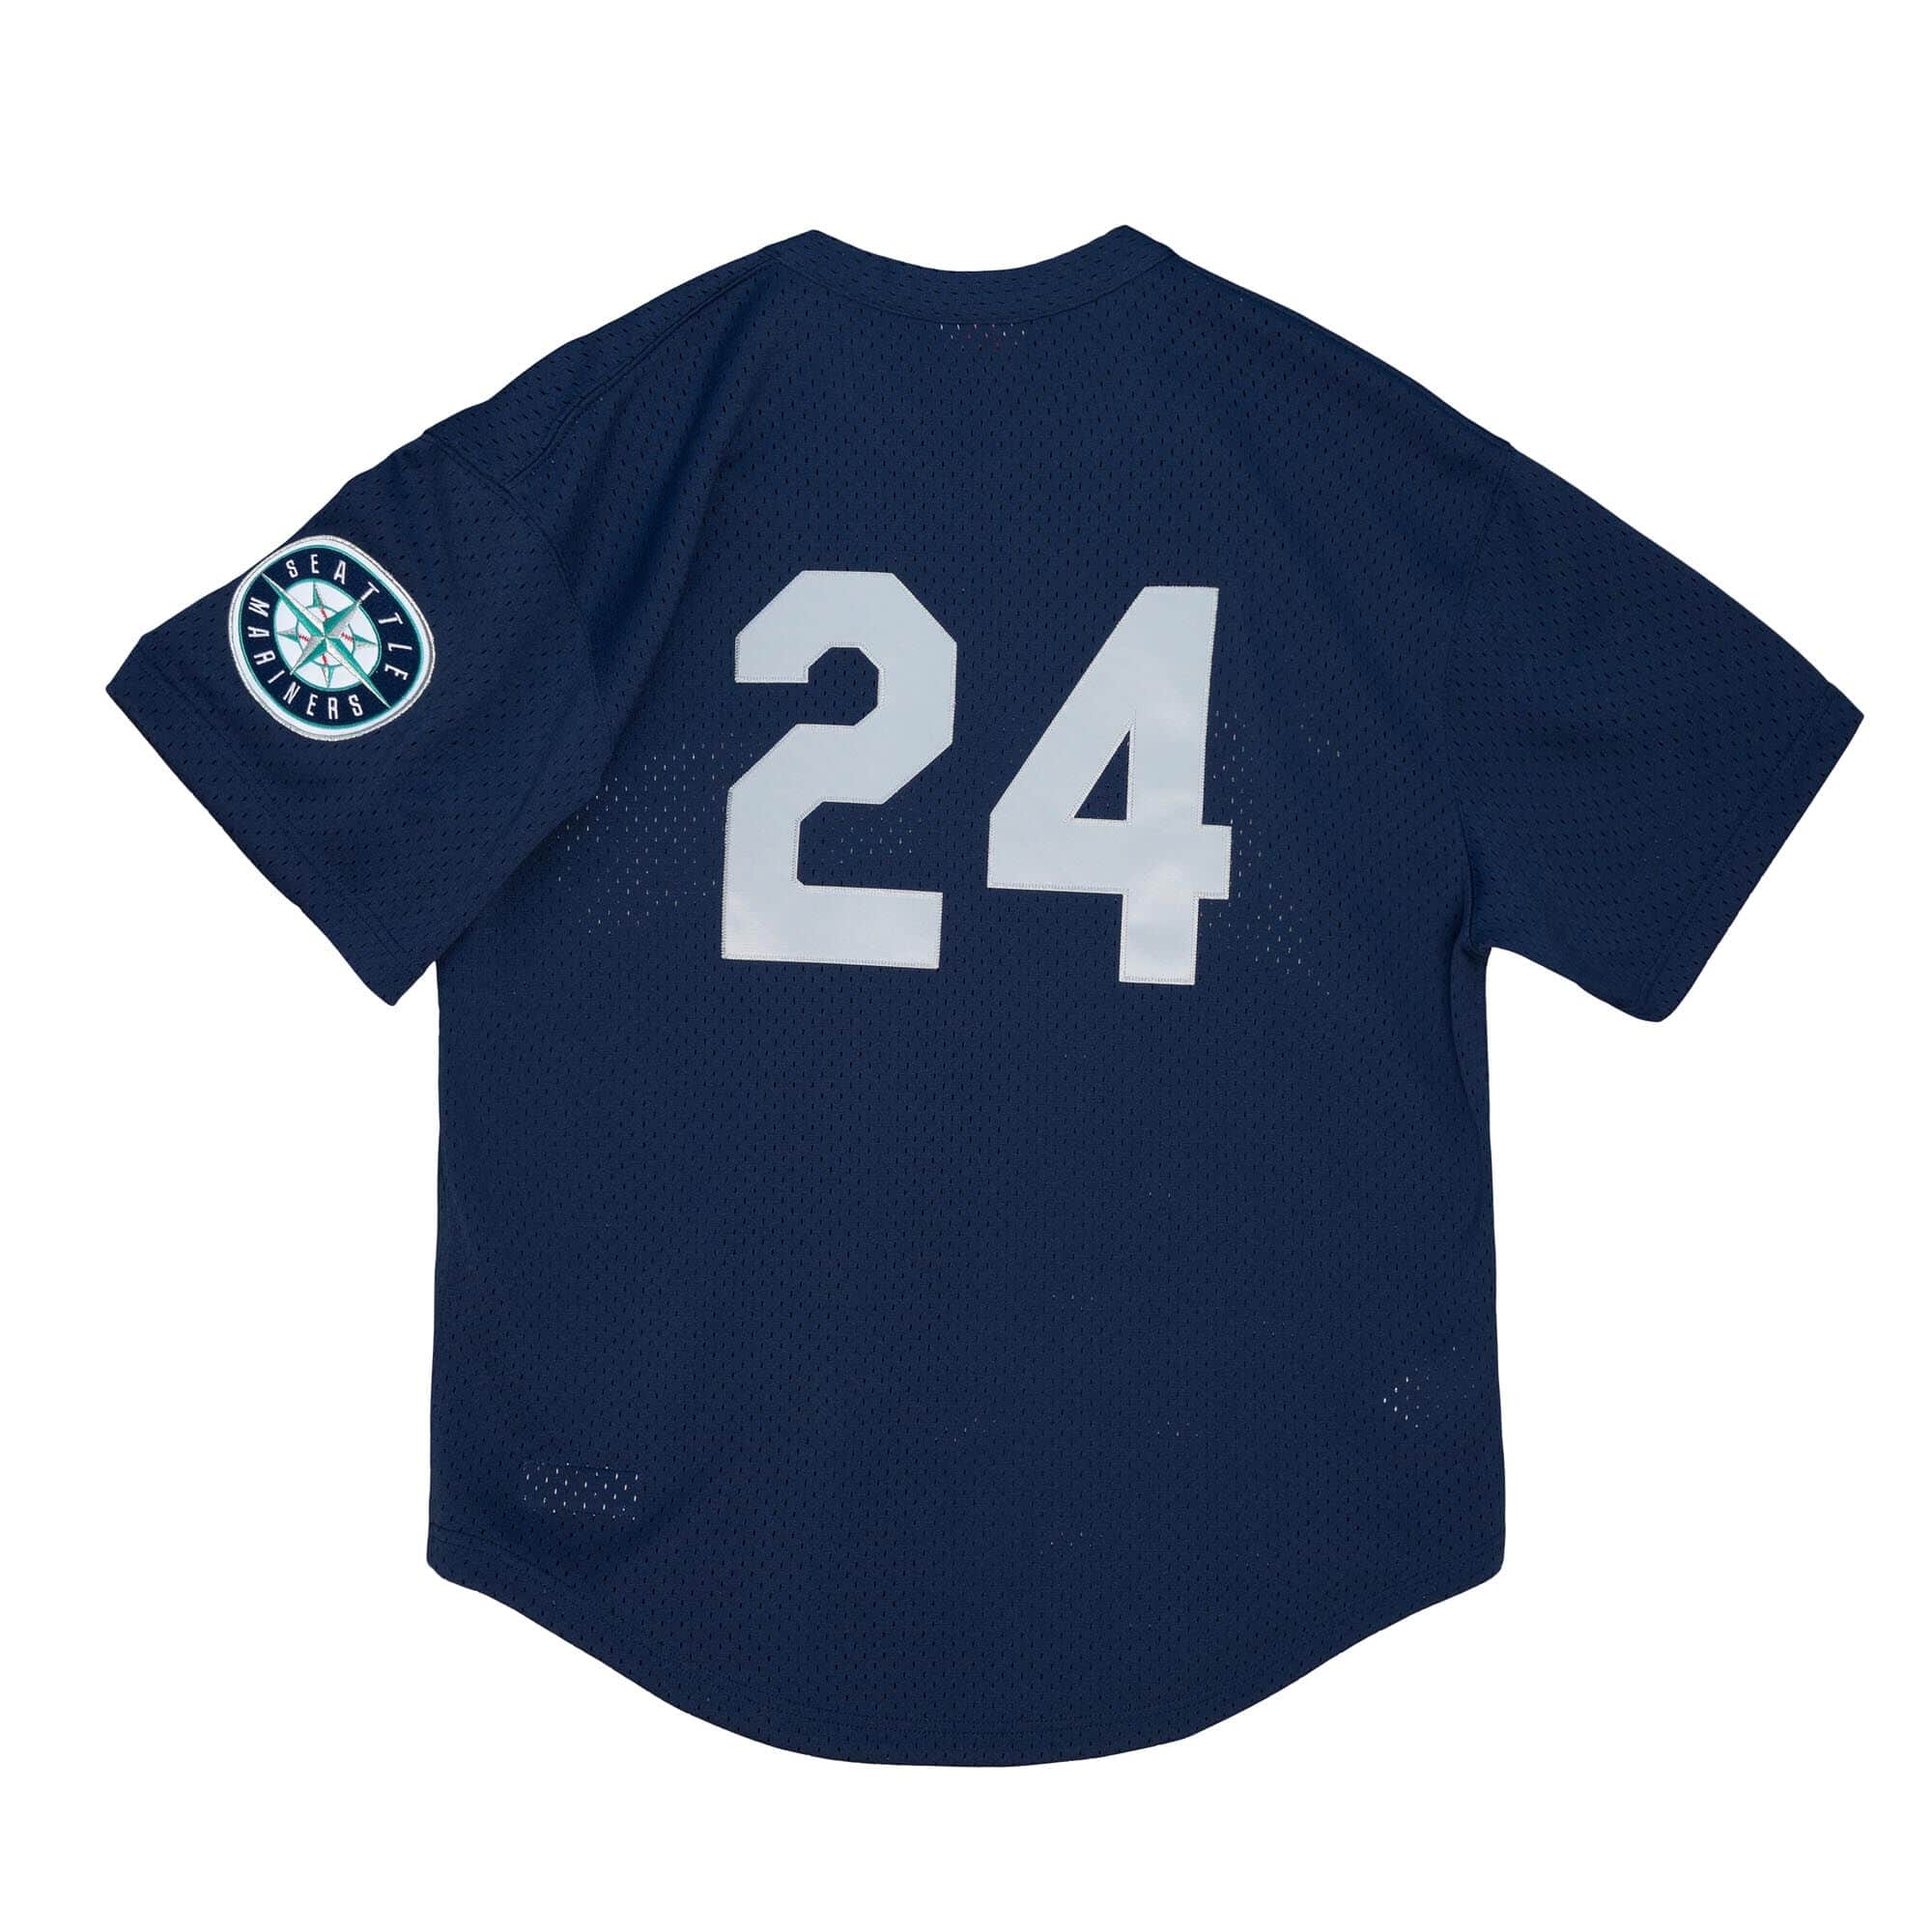 Mariners jersey number